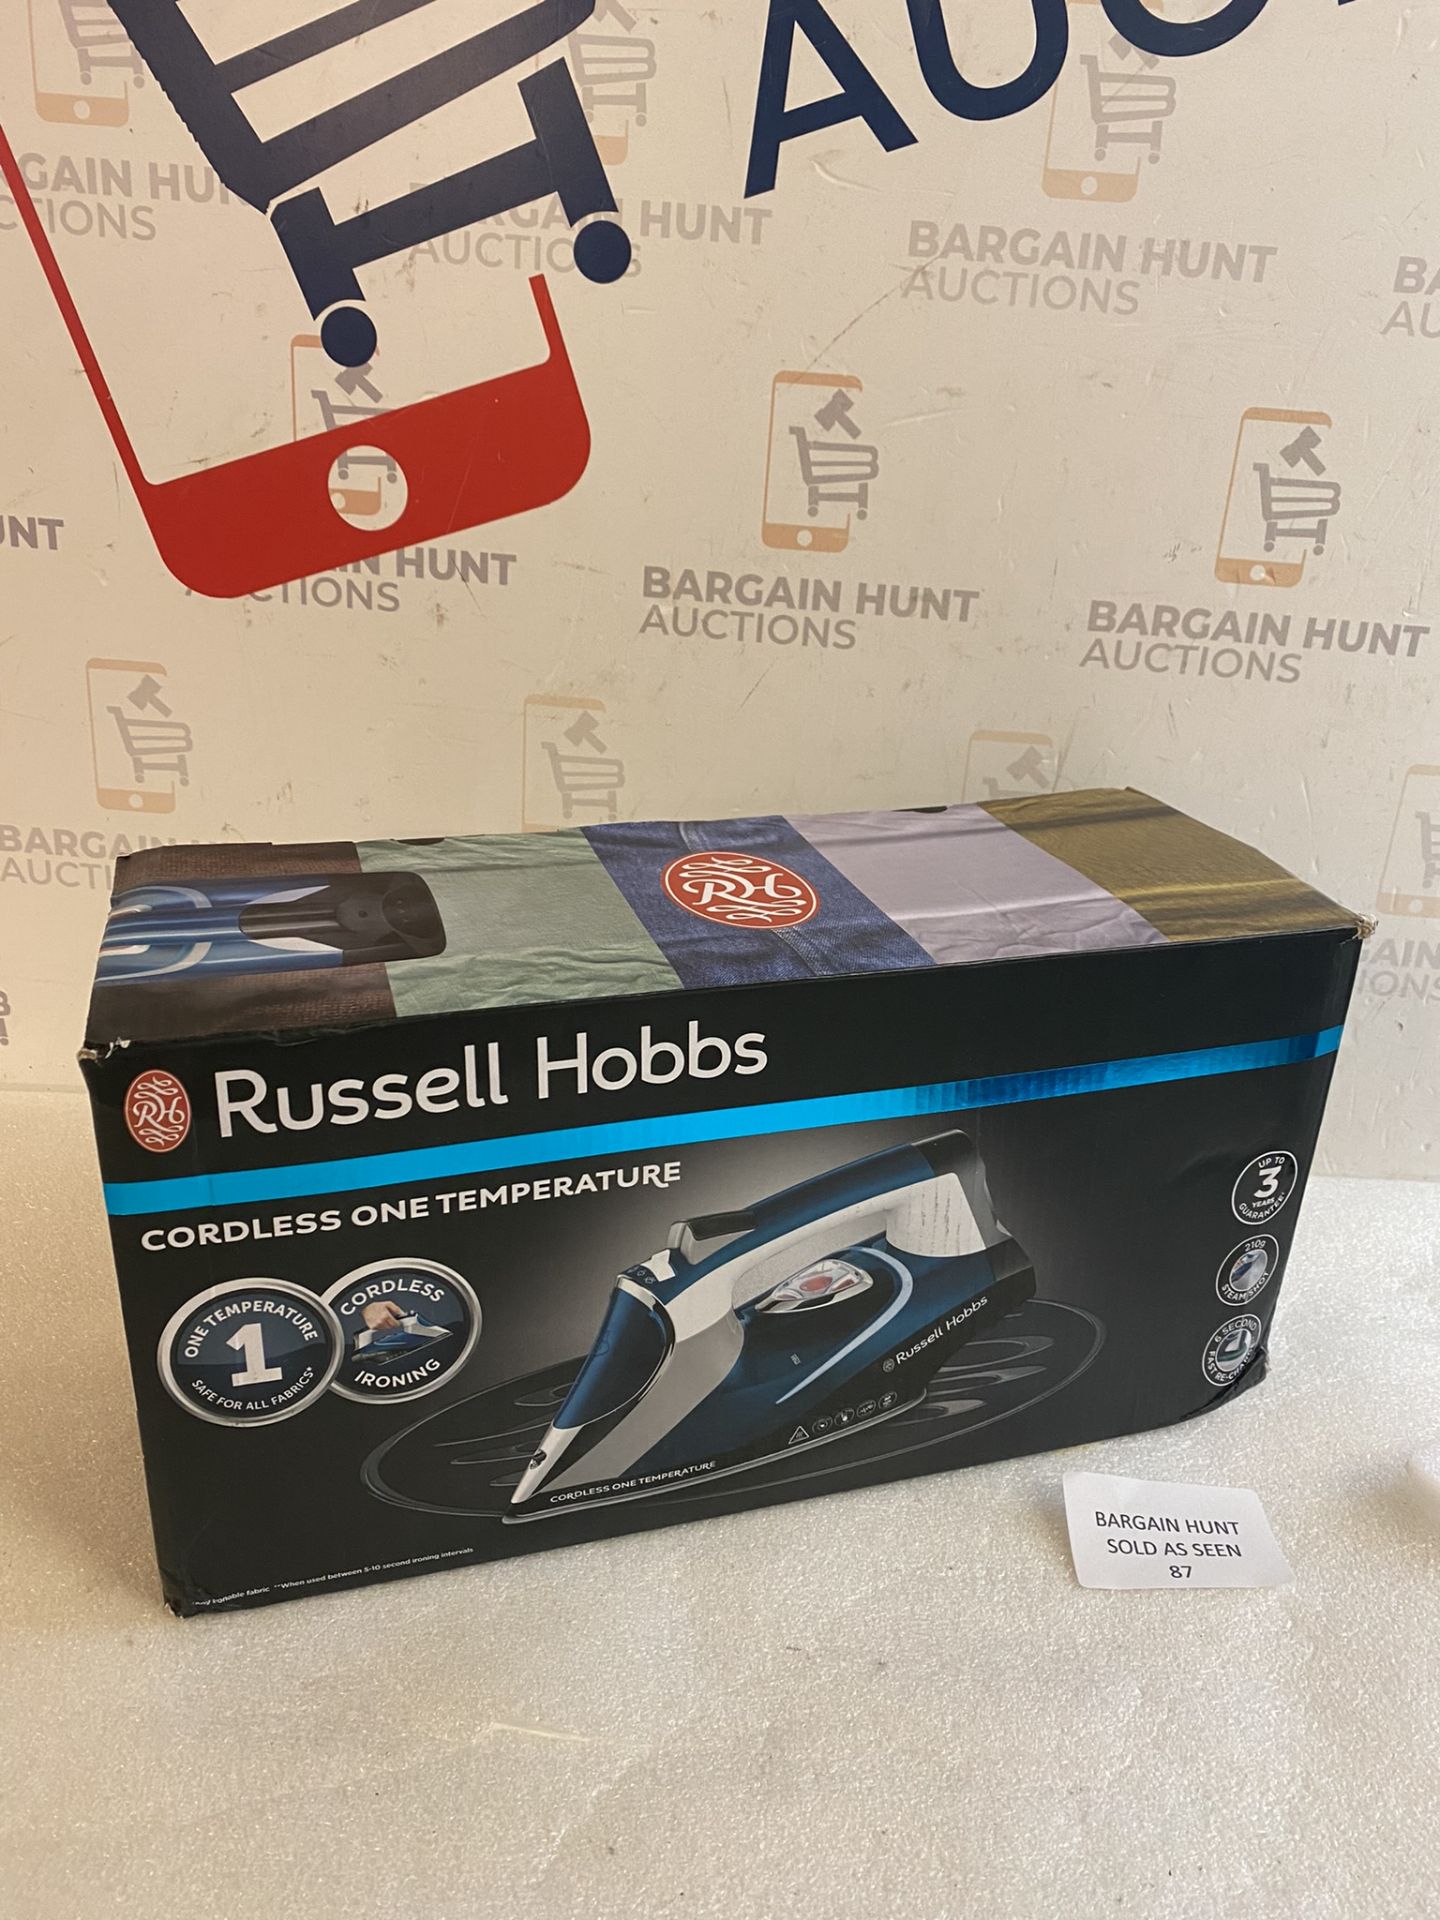 Russell Hobbs 26020 Cordless One-Temperature Steam Iron RRP £48.99 - Image 2 of 2